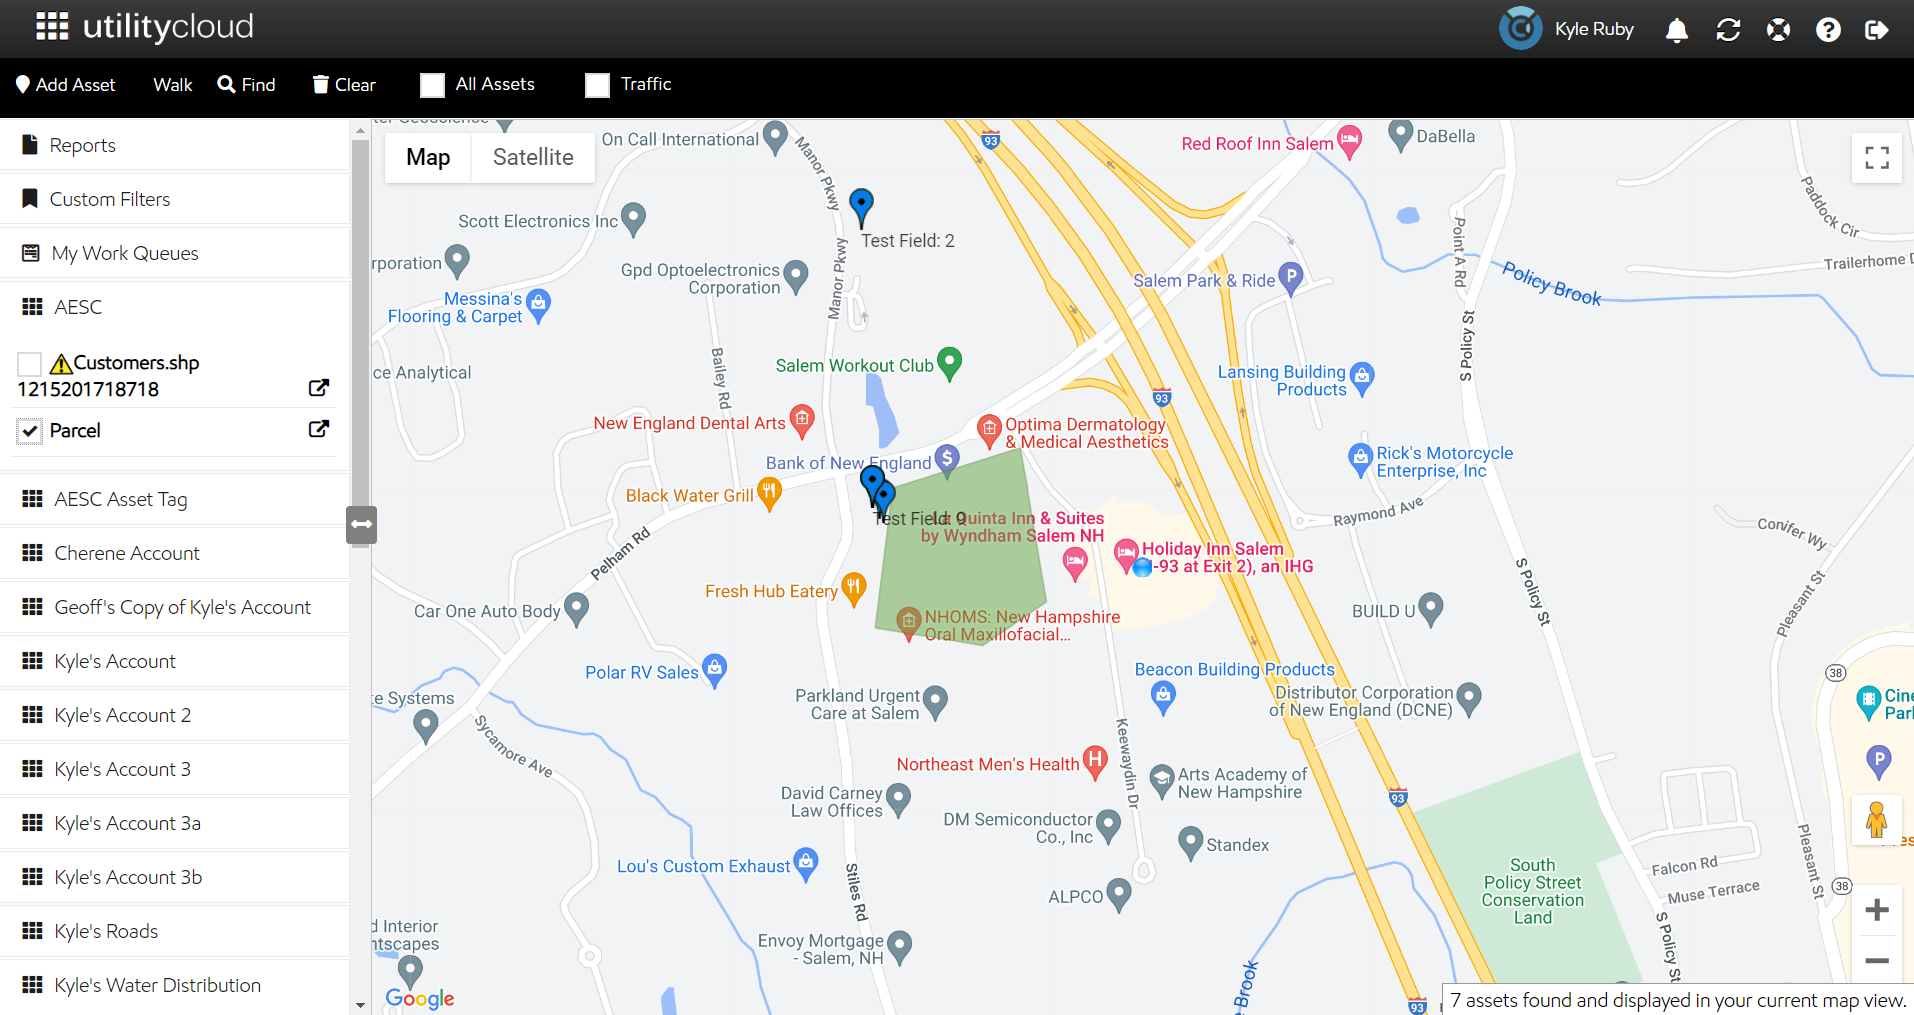 A typical example of what a user would see on the Map page.